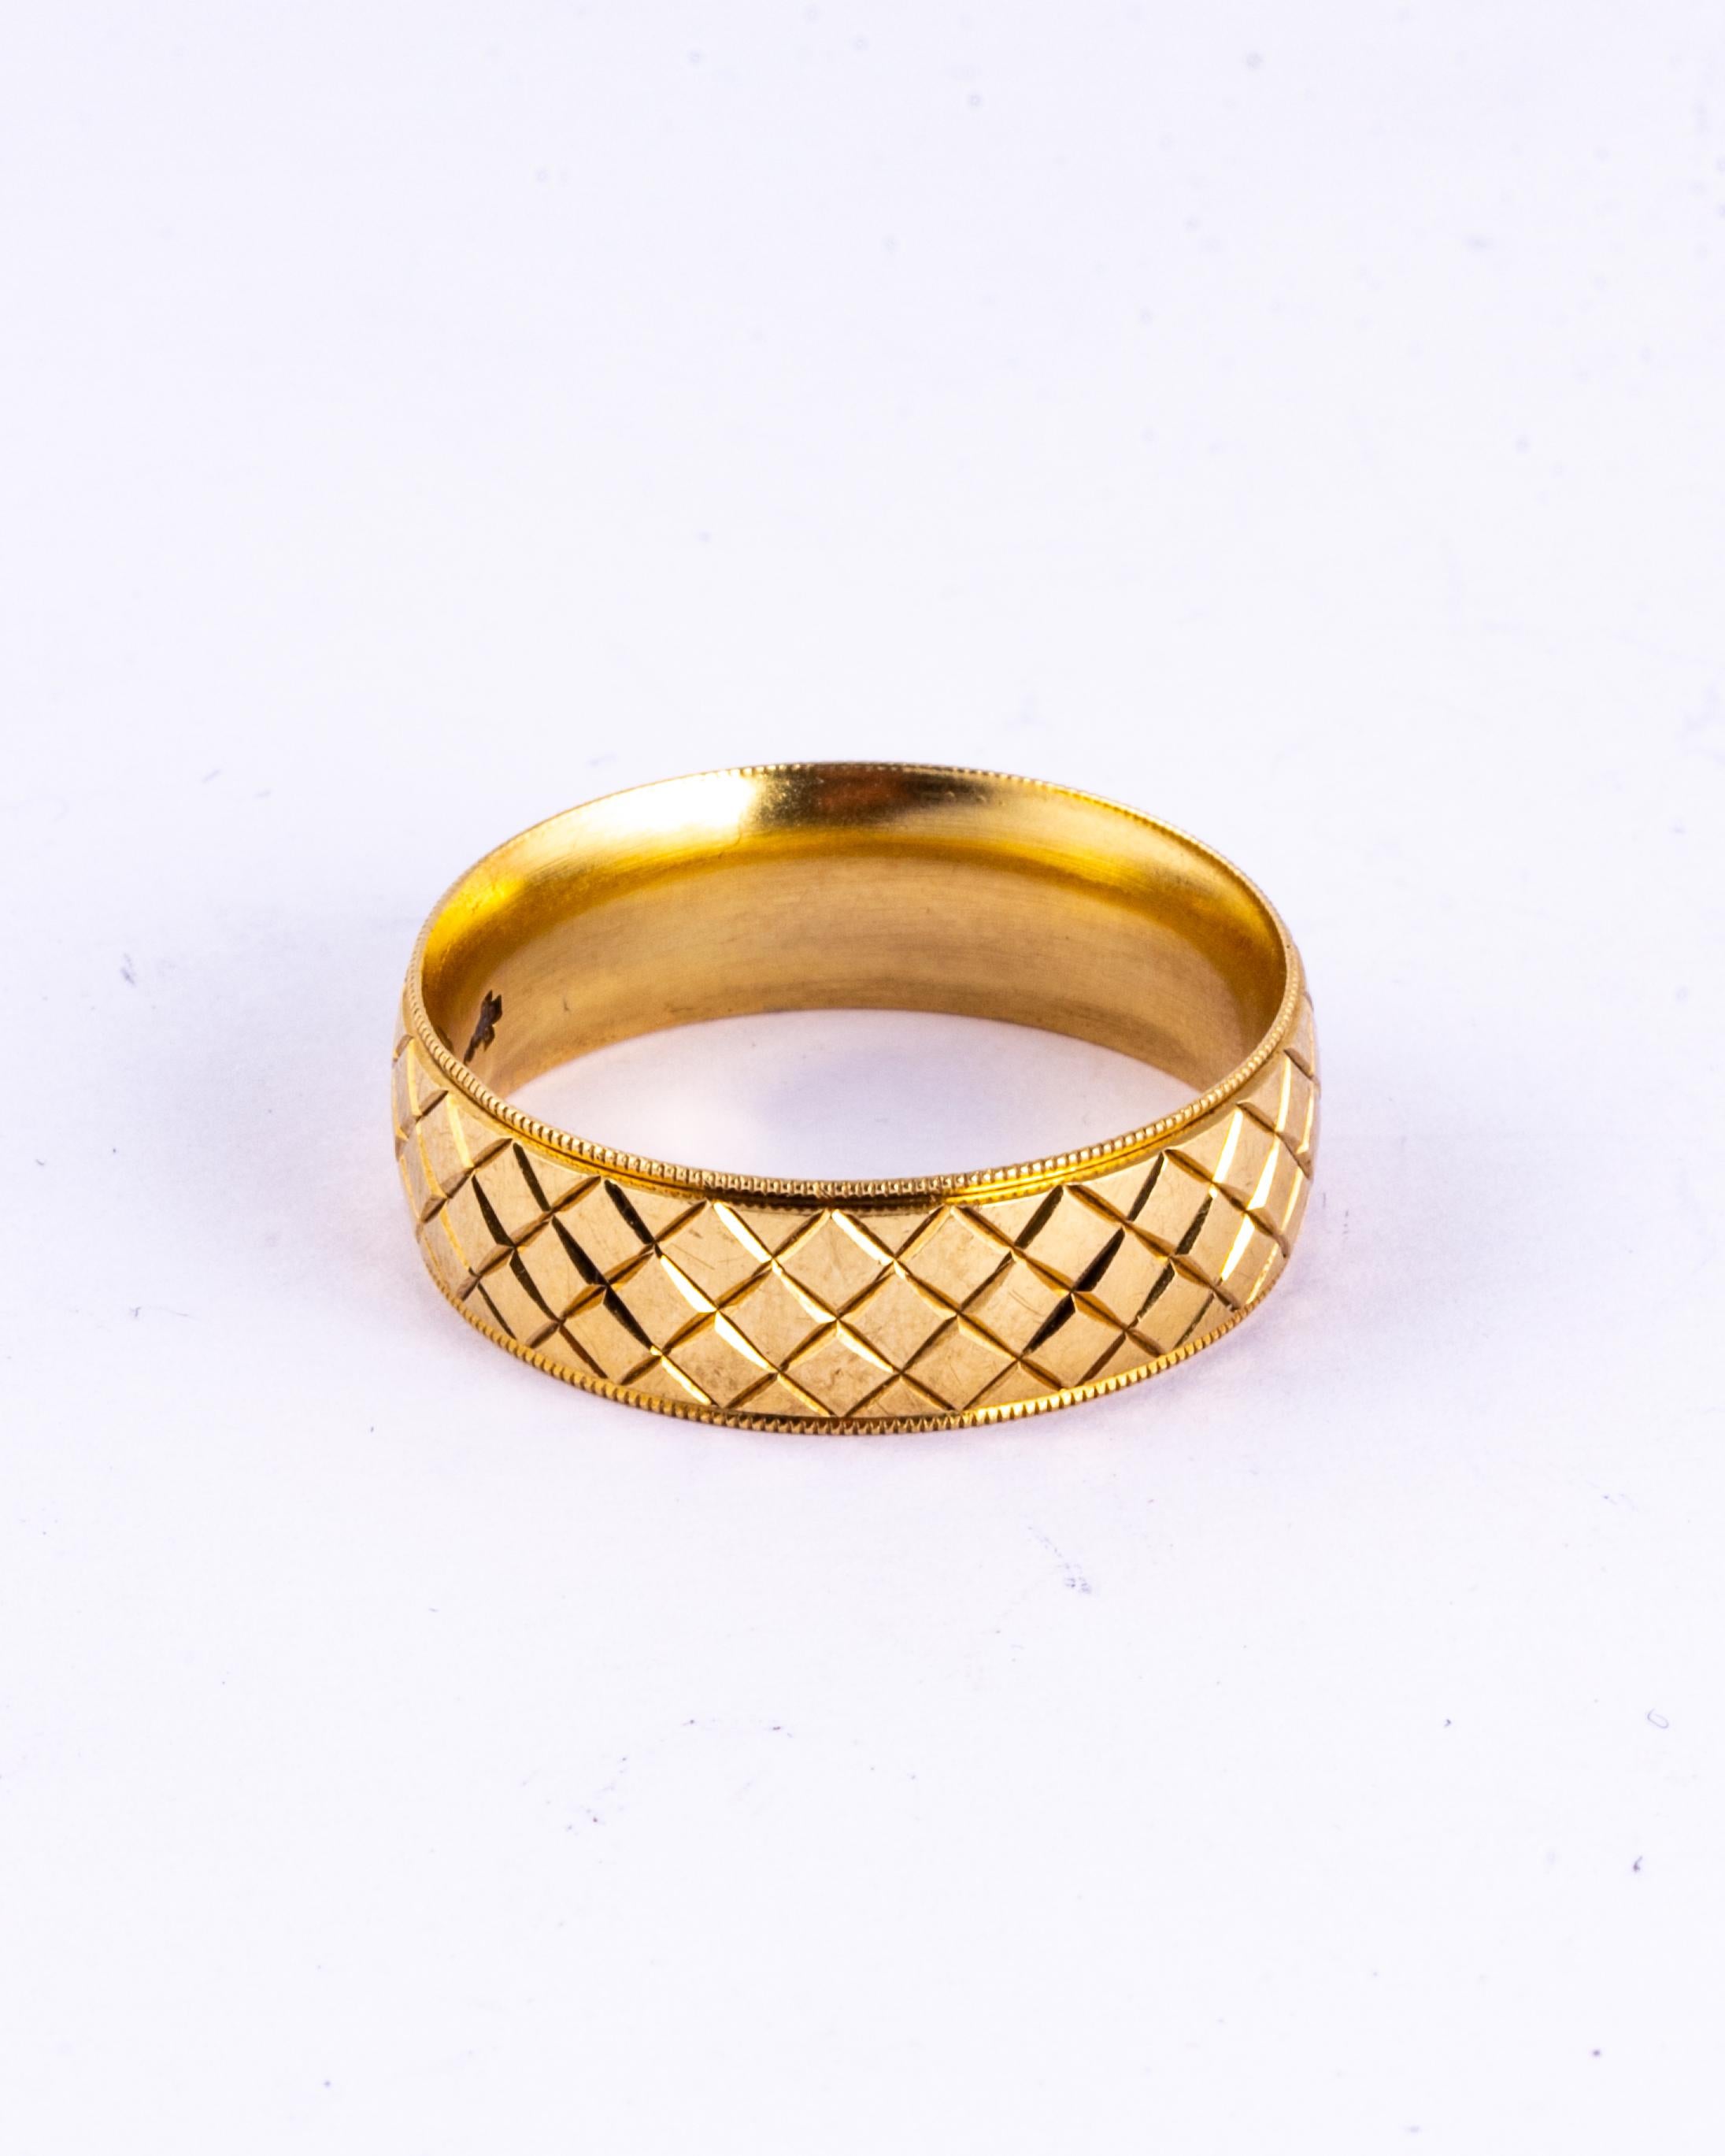 The design engraved beautifully into this 9ct gold band is full of detail. This would make a great fancy wedding band or an ornate everyday ring. Made in Birmingham, England.

Size: Z or 12 1/2
Band Width: 8mm

Weight: 8.7g